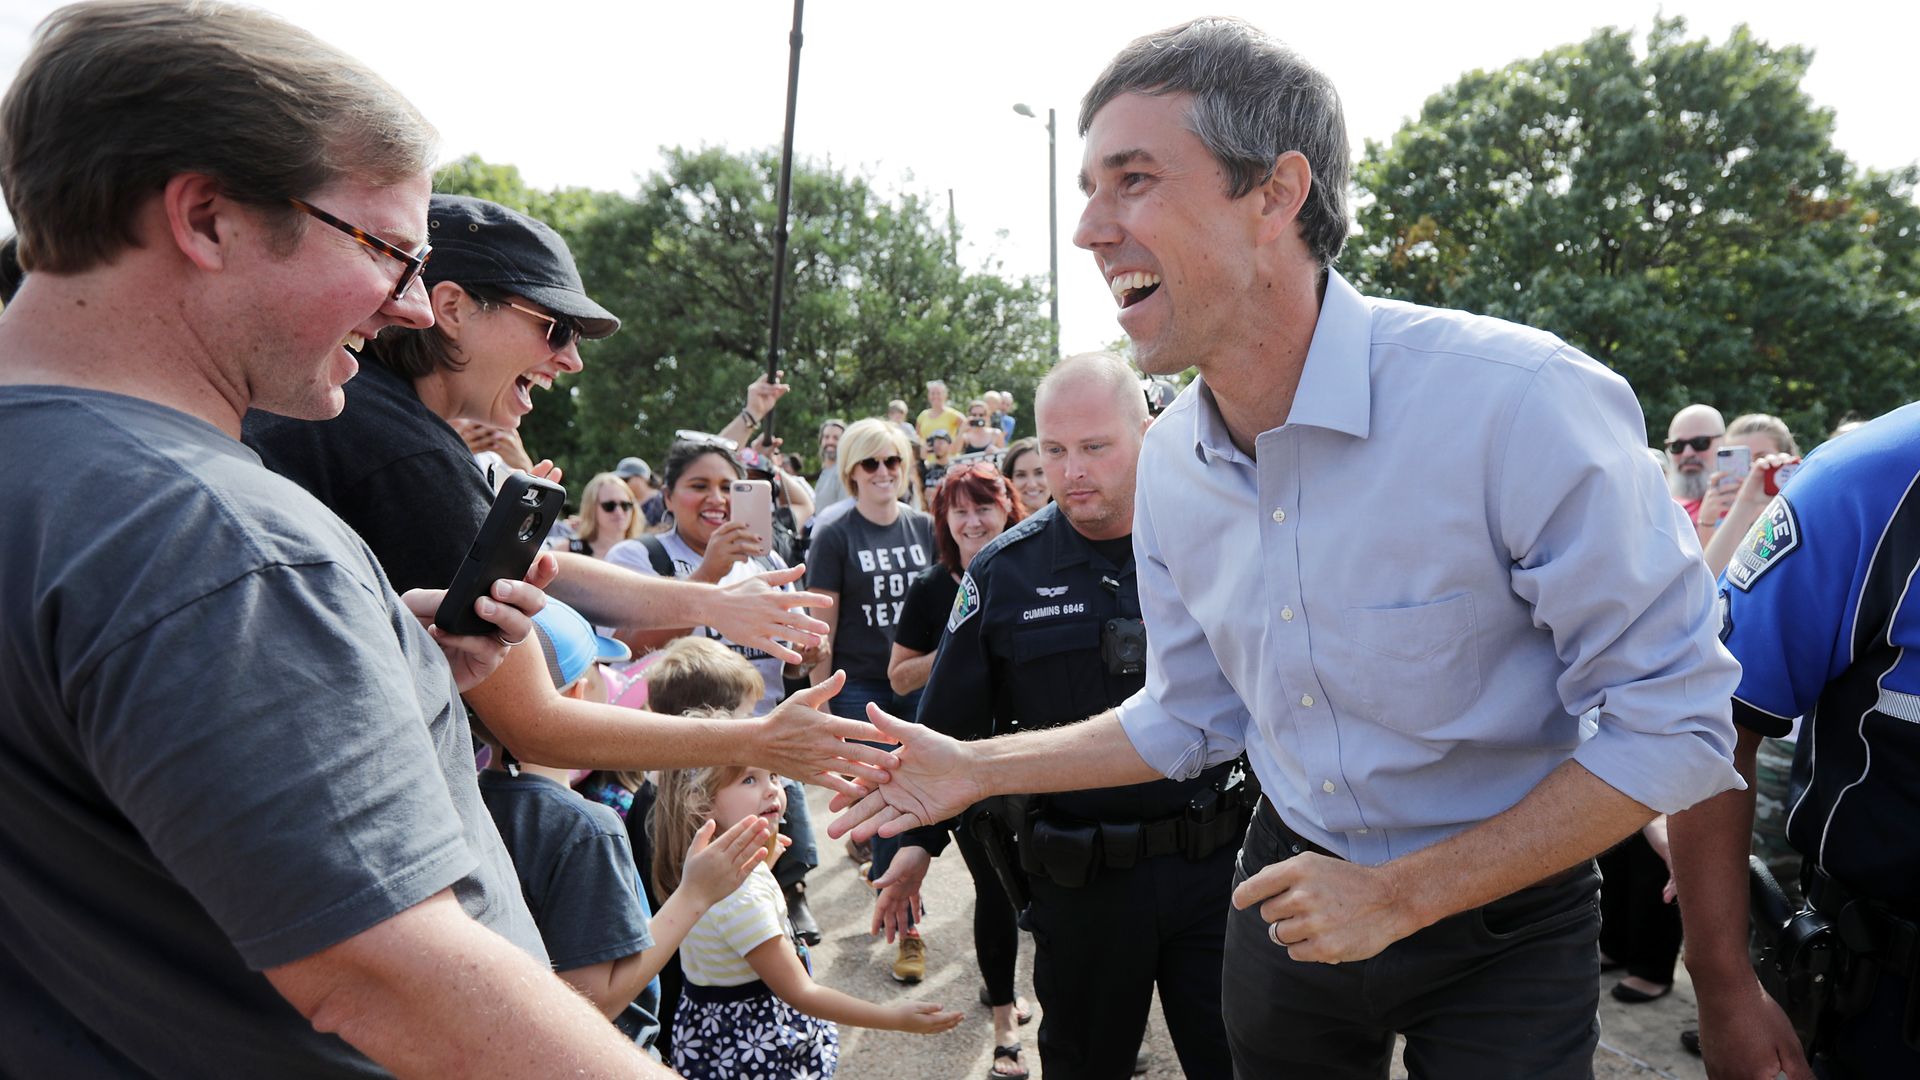 Beto O'Rourke high fives with supporters.